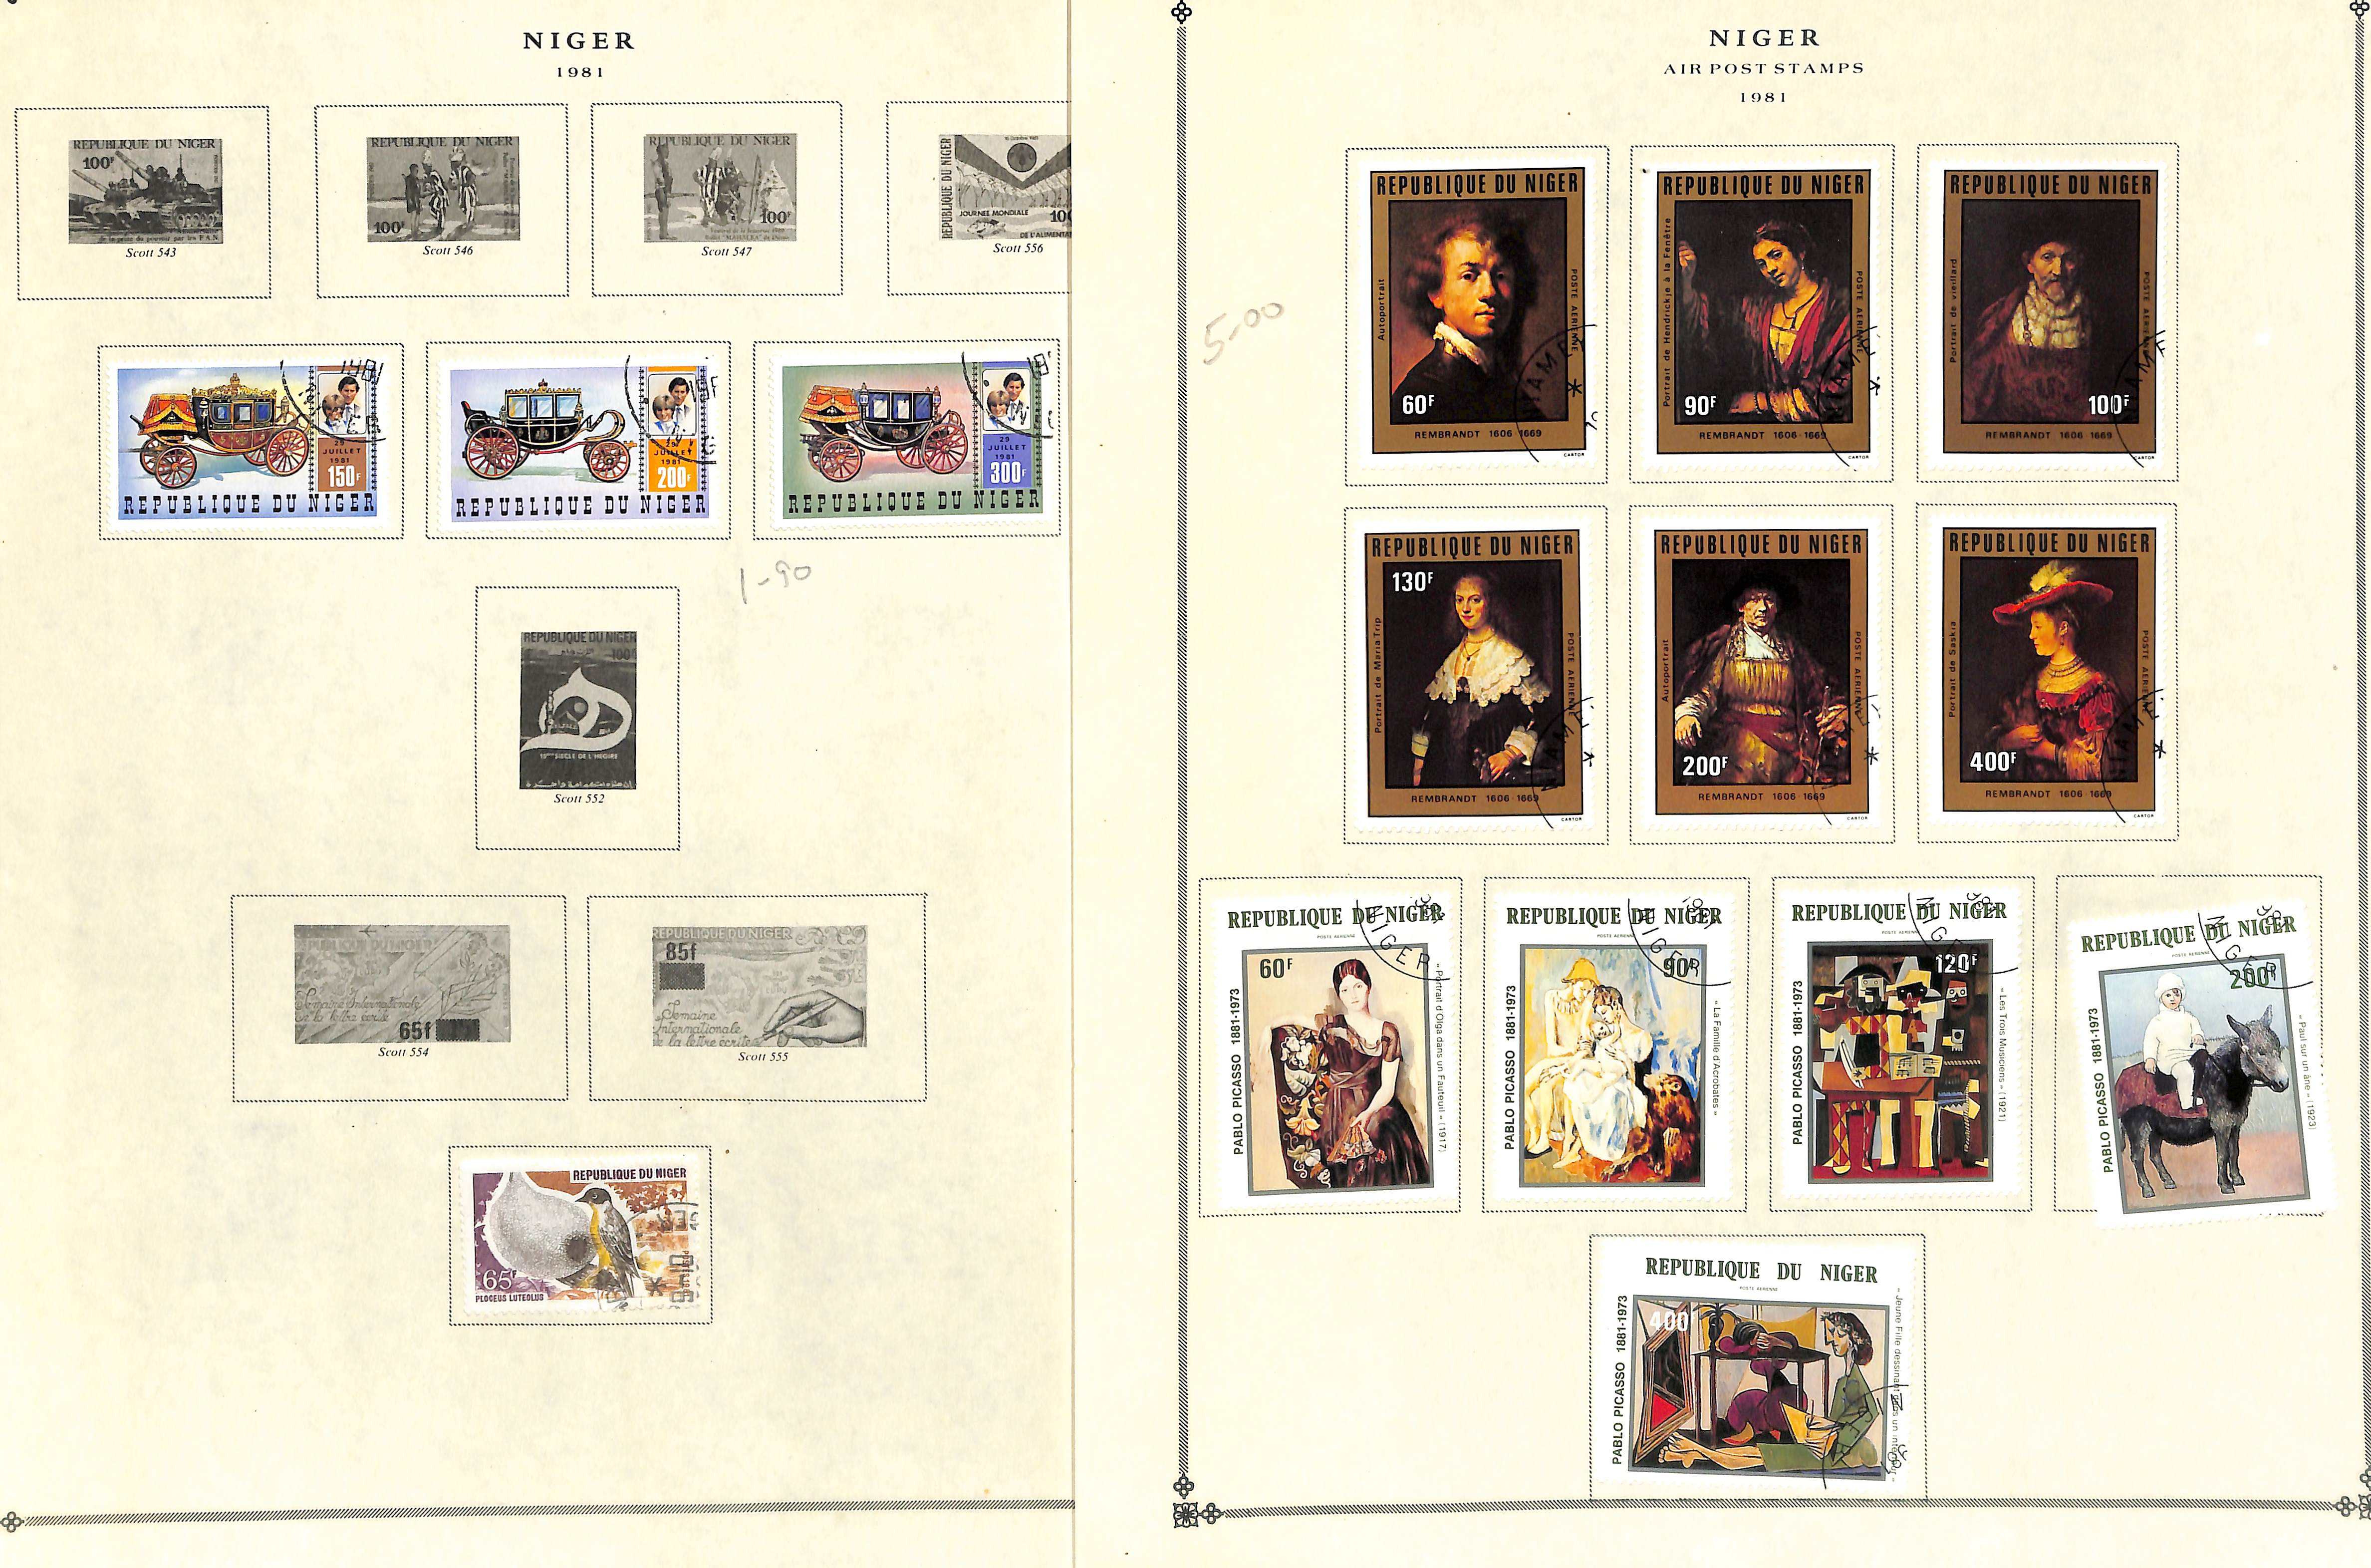 Niger. 1921 - c.1990 Mint and used collection with covers, die and plate proofs. (100s). - Image 24 of 26